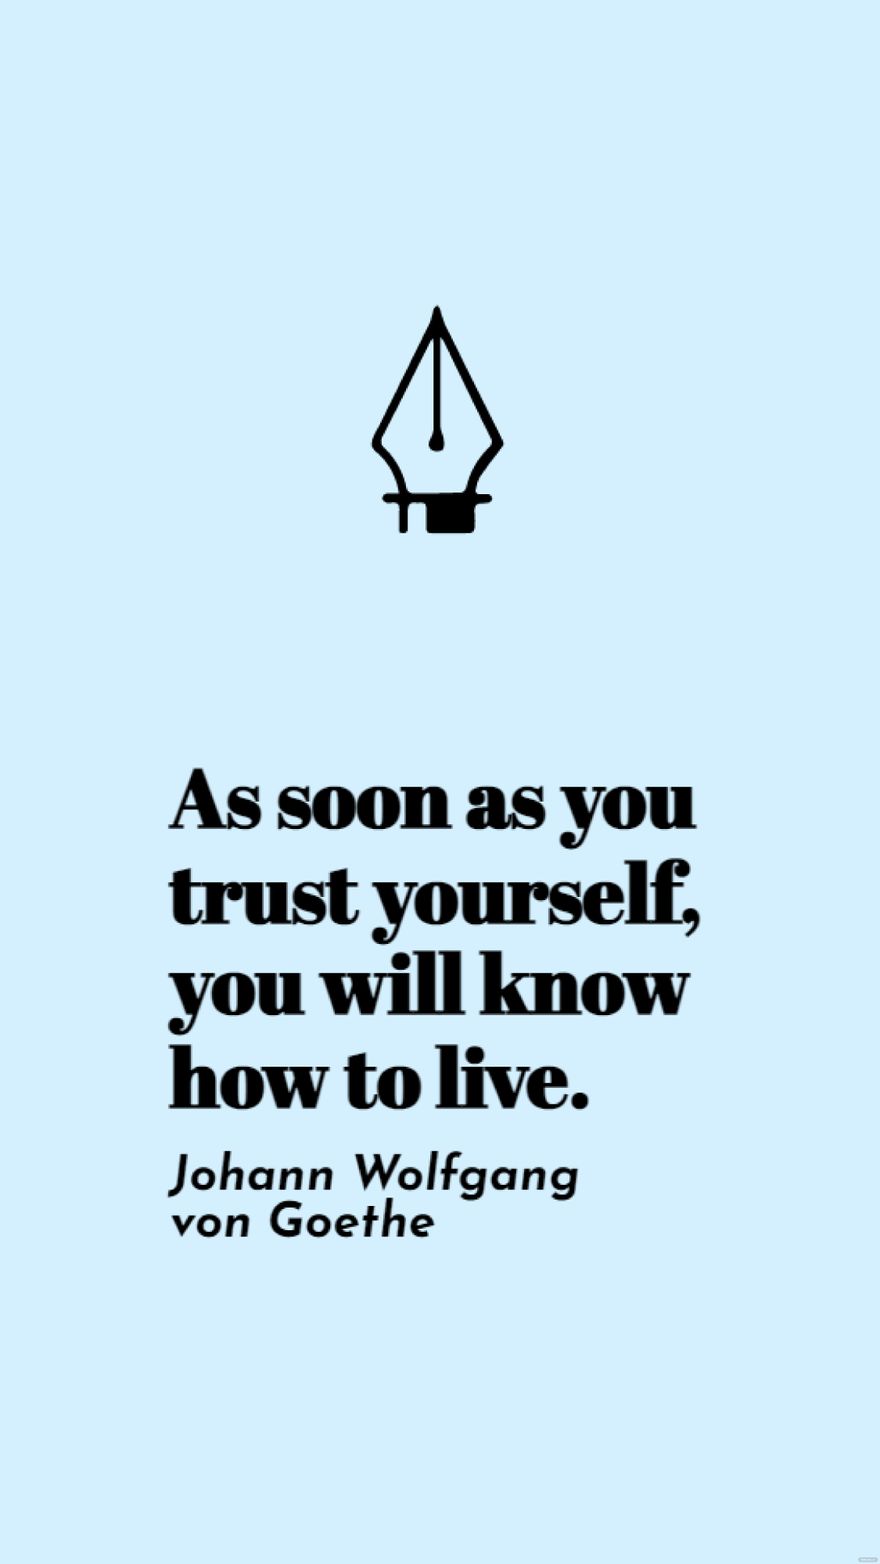 Free Johann Wolfgang von Goethe - As soon as you trust yourself, you will know how to live. in JPG